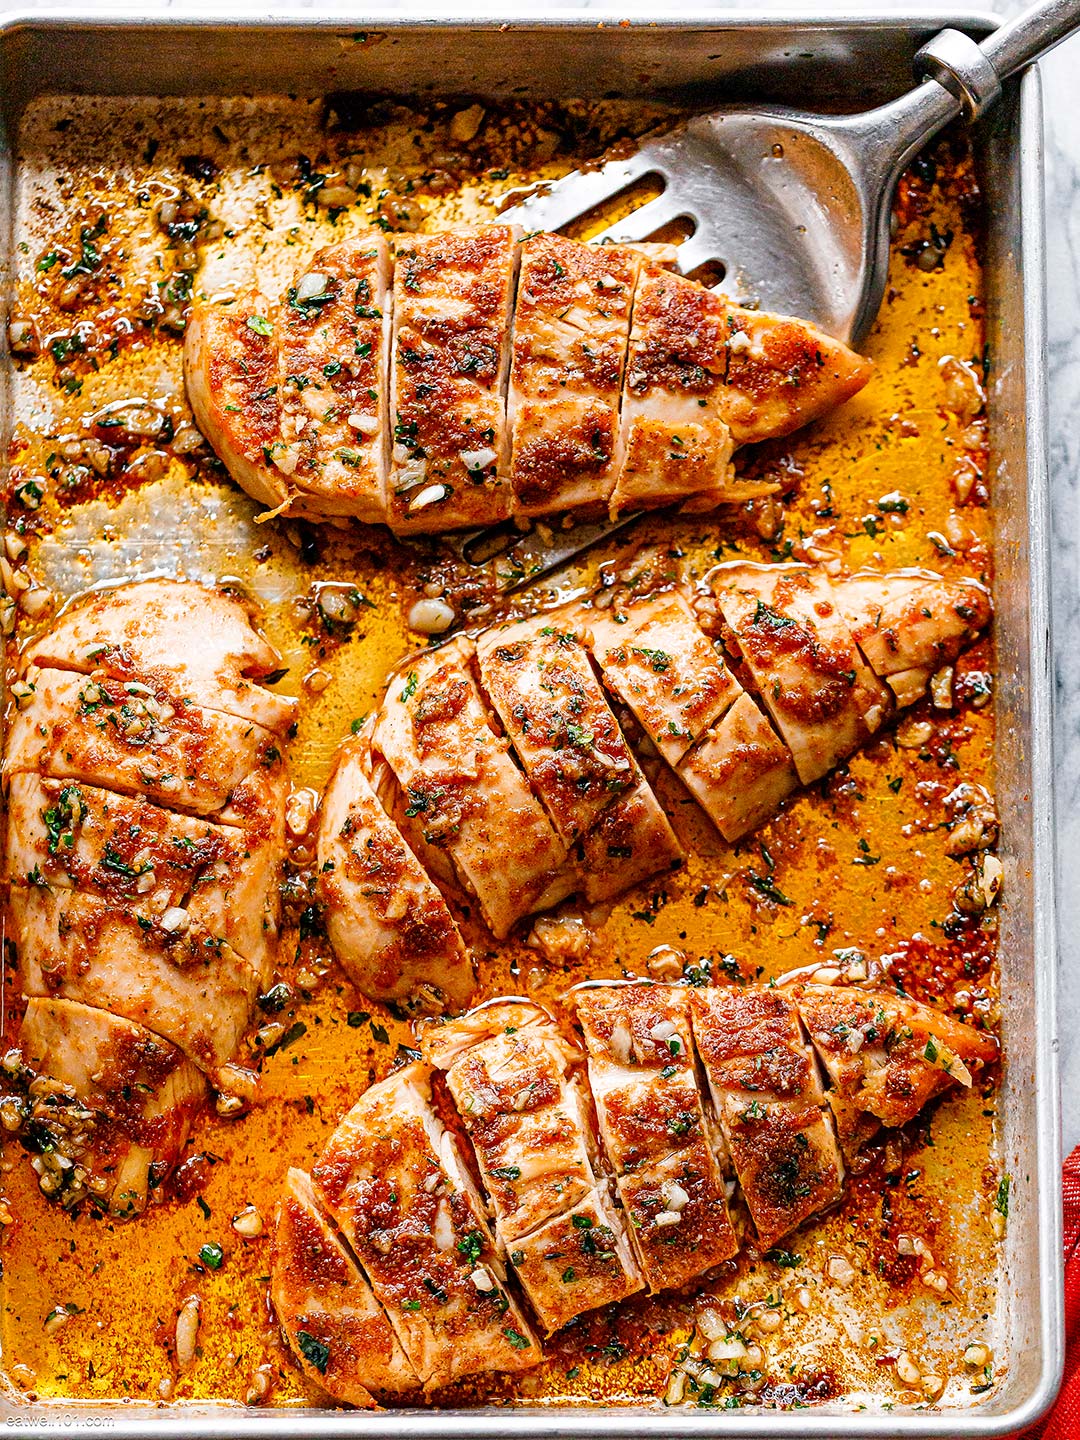 https://www.eatwell101.com/wp-content/uploads/2022/07/Oven-Baked-Chicken-Breasts.jpg